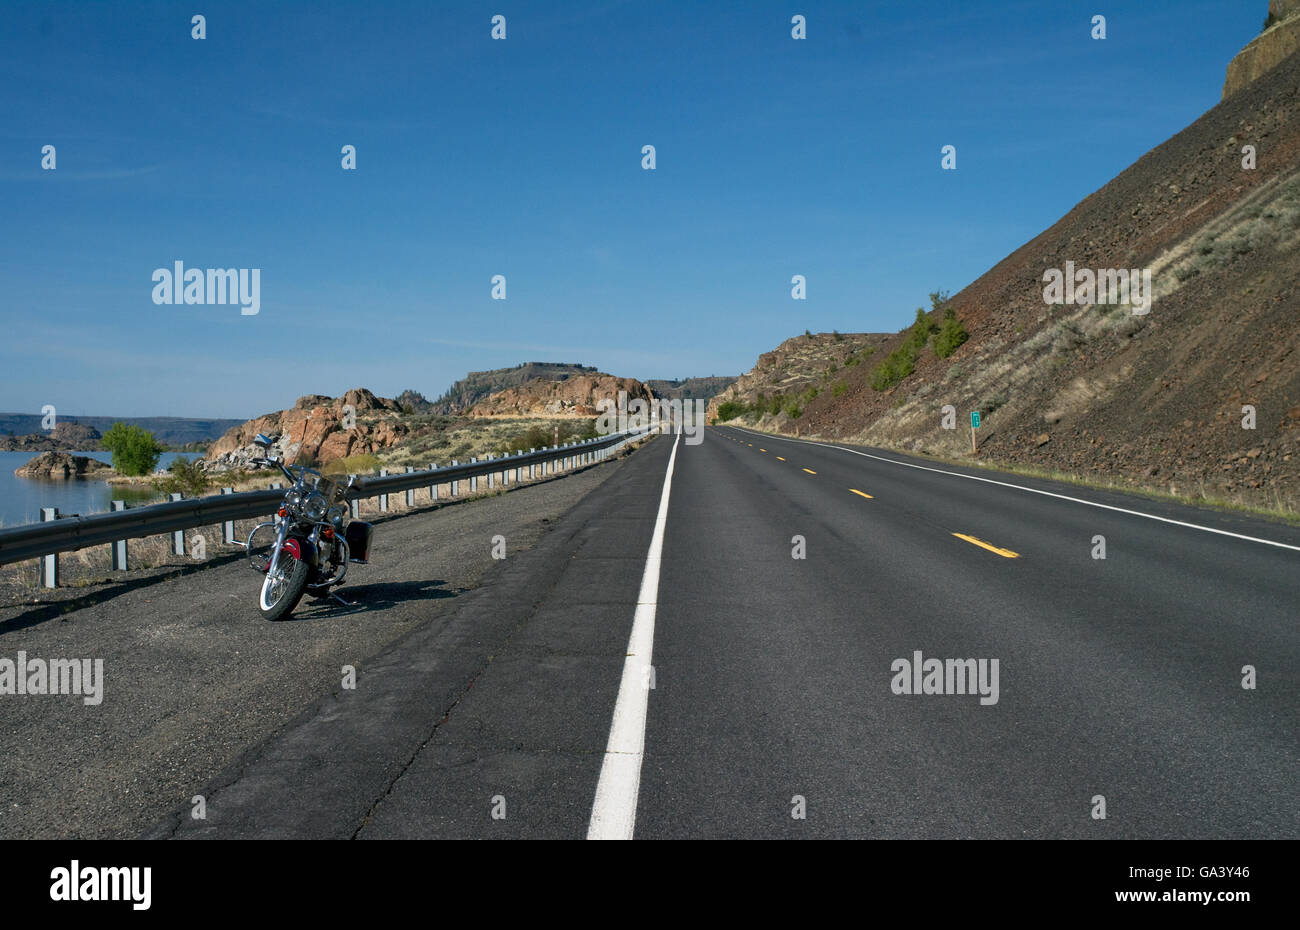 A lone motorcycle is parked on Washington State's scenic highway 155, south of Grand Coulee, Washington State, USA. Stock Photo